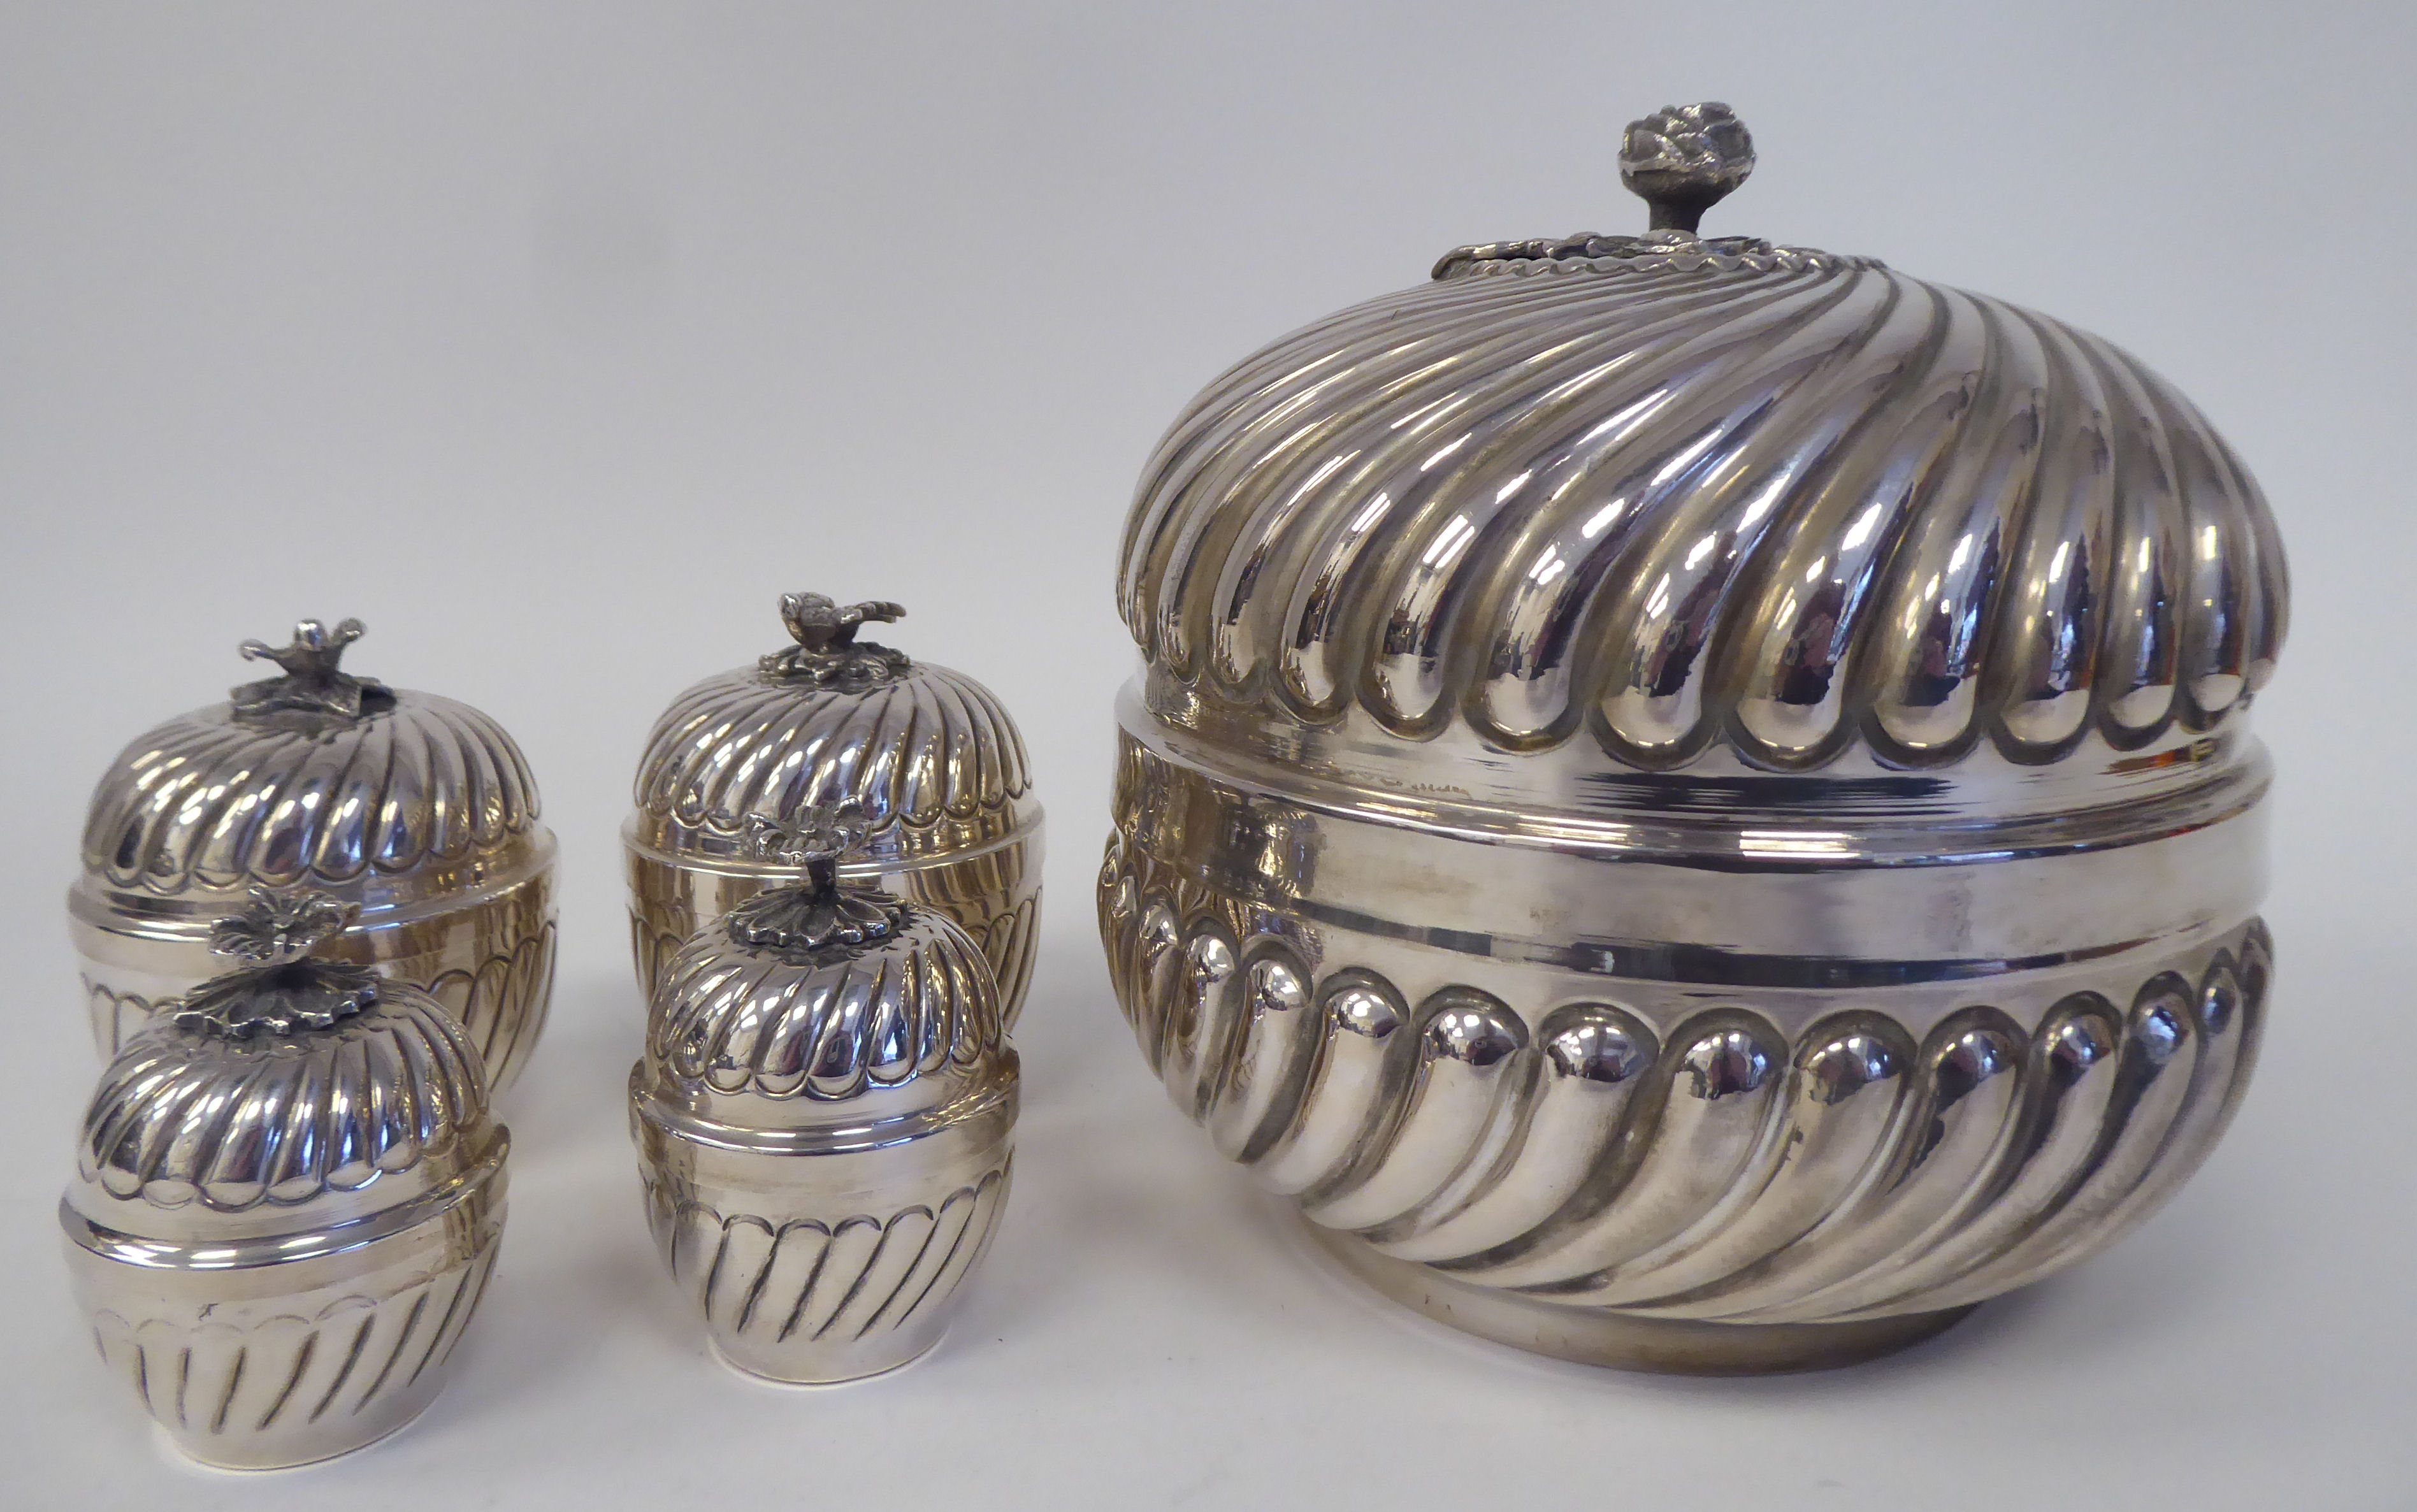 A matched set of silver coloured metal tableware with embossed, swirling, demi-reeded ornament